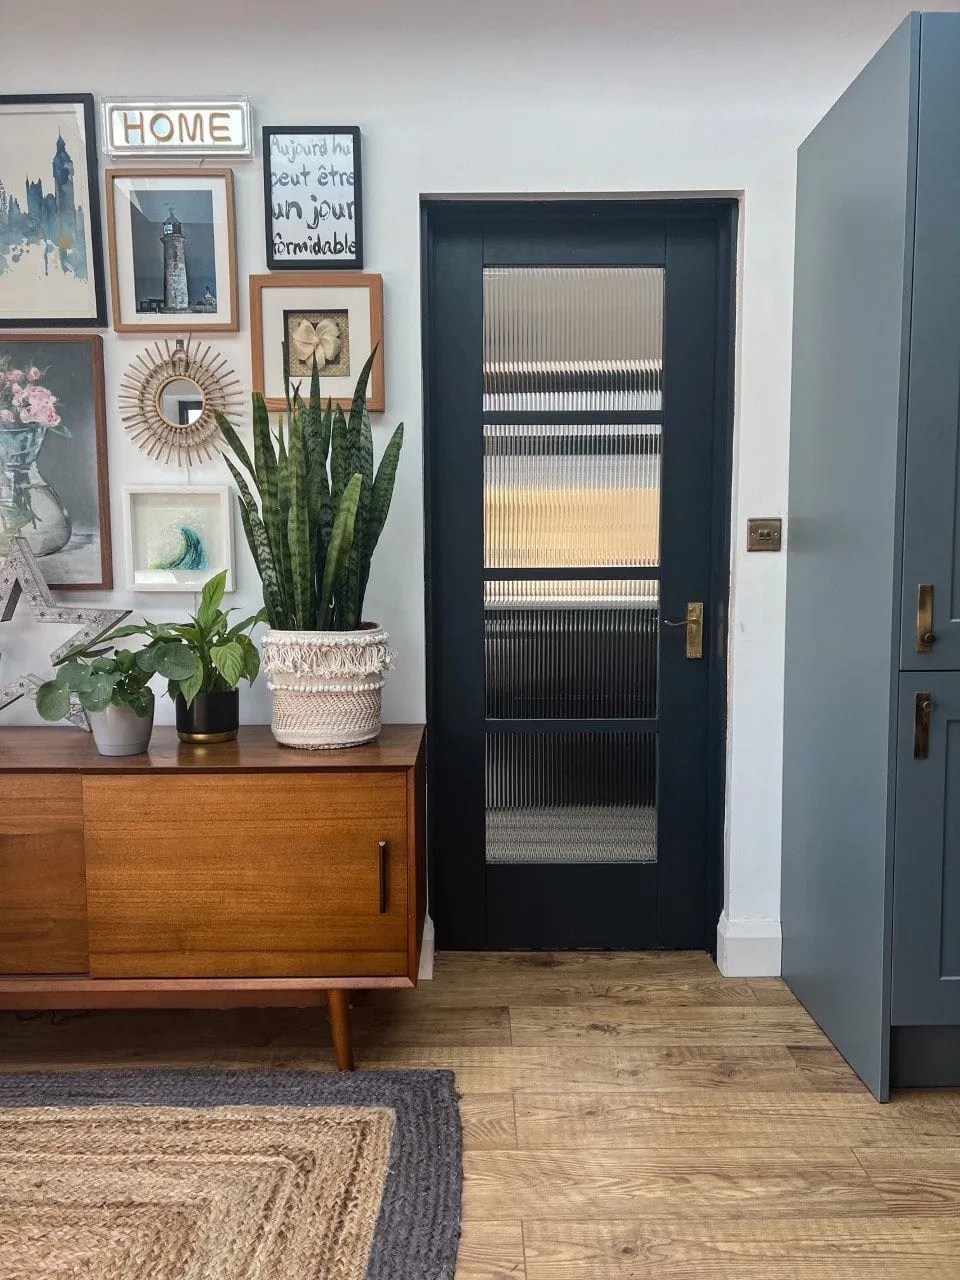 Crittall Door Hack – How to DIY Crittall Style Doors for Your Home